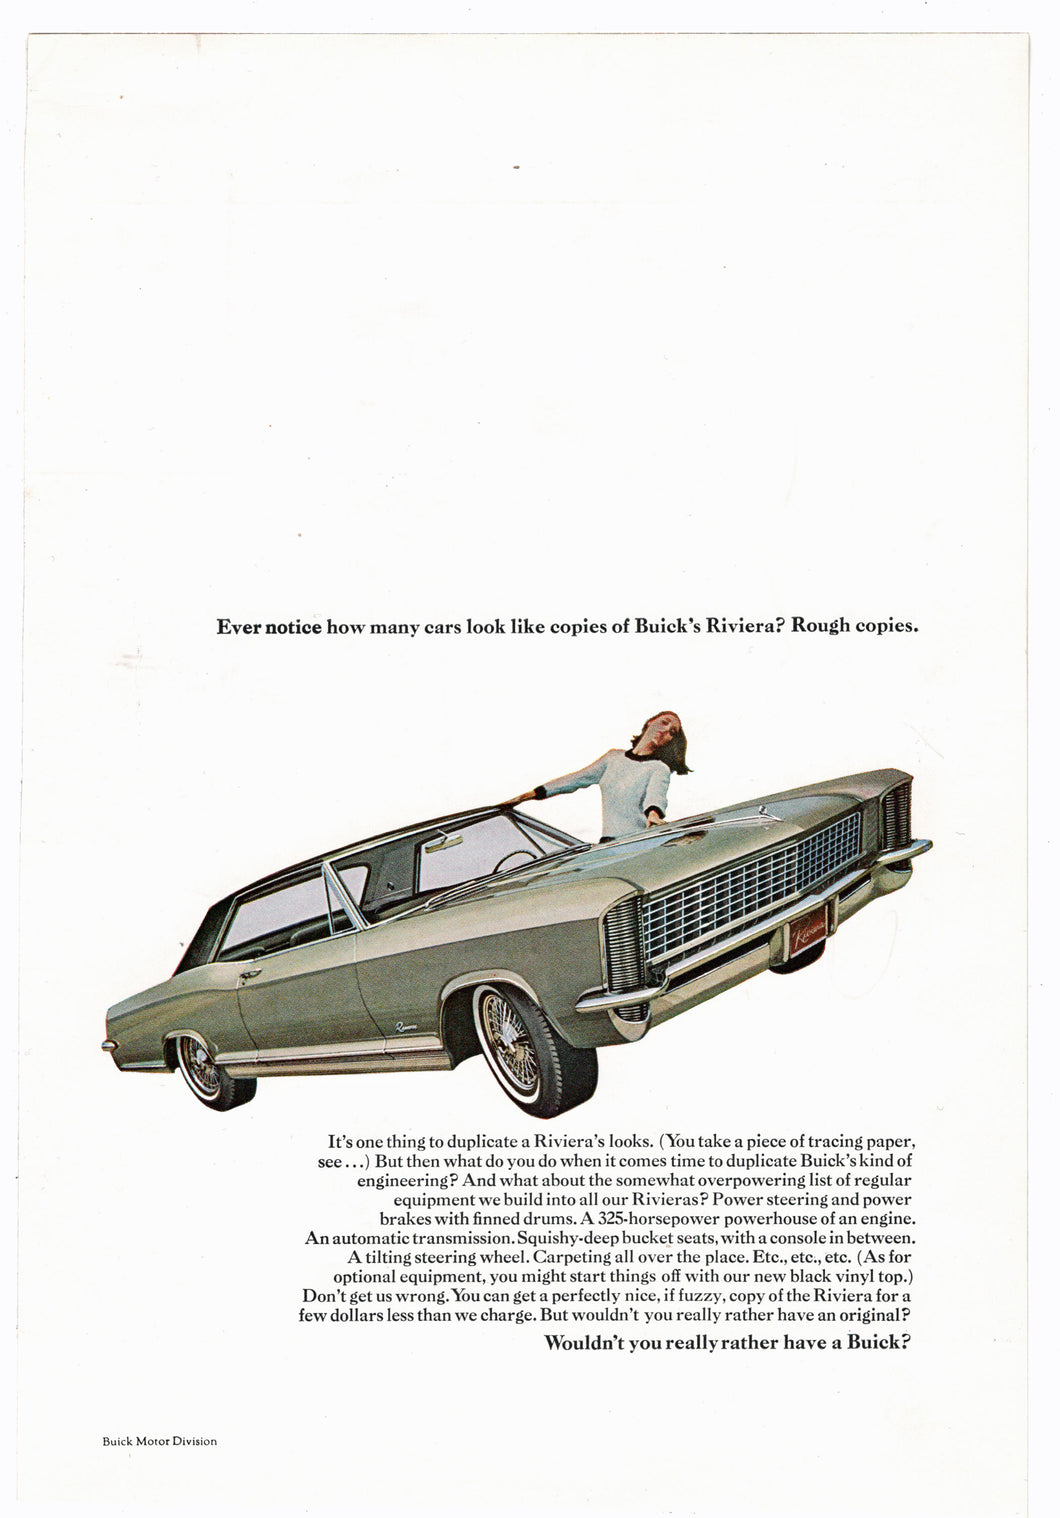 Buick Riviera - Vintage Ad - (The new 325 Horsepower Engine) # 13 - General Motors Company 1960's